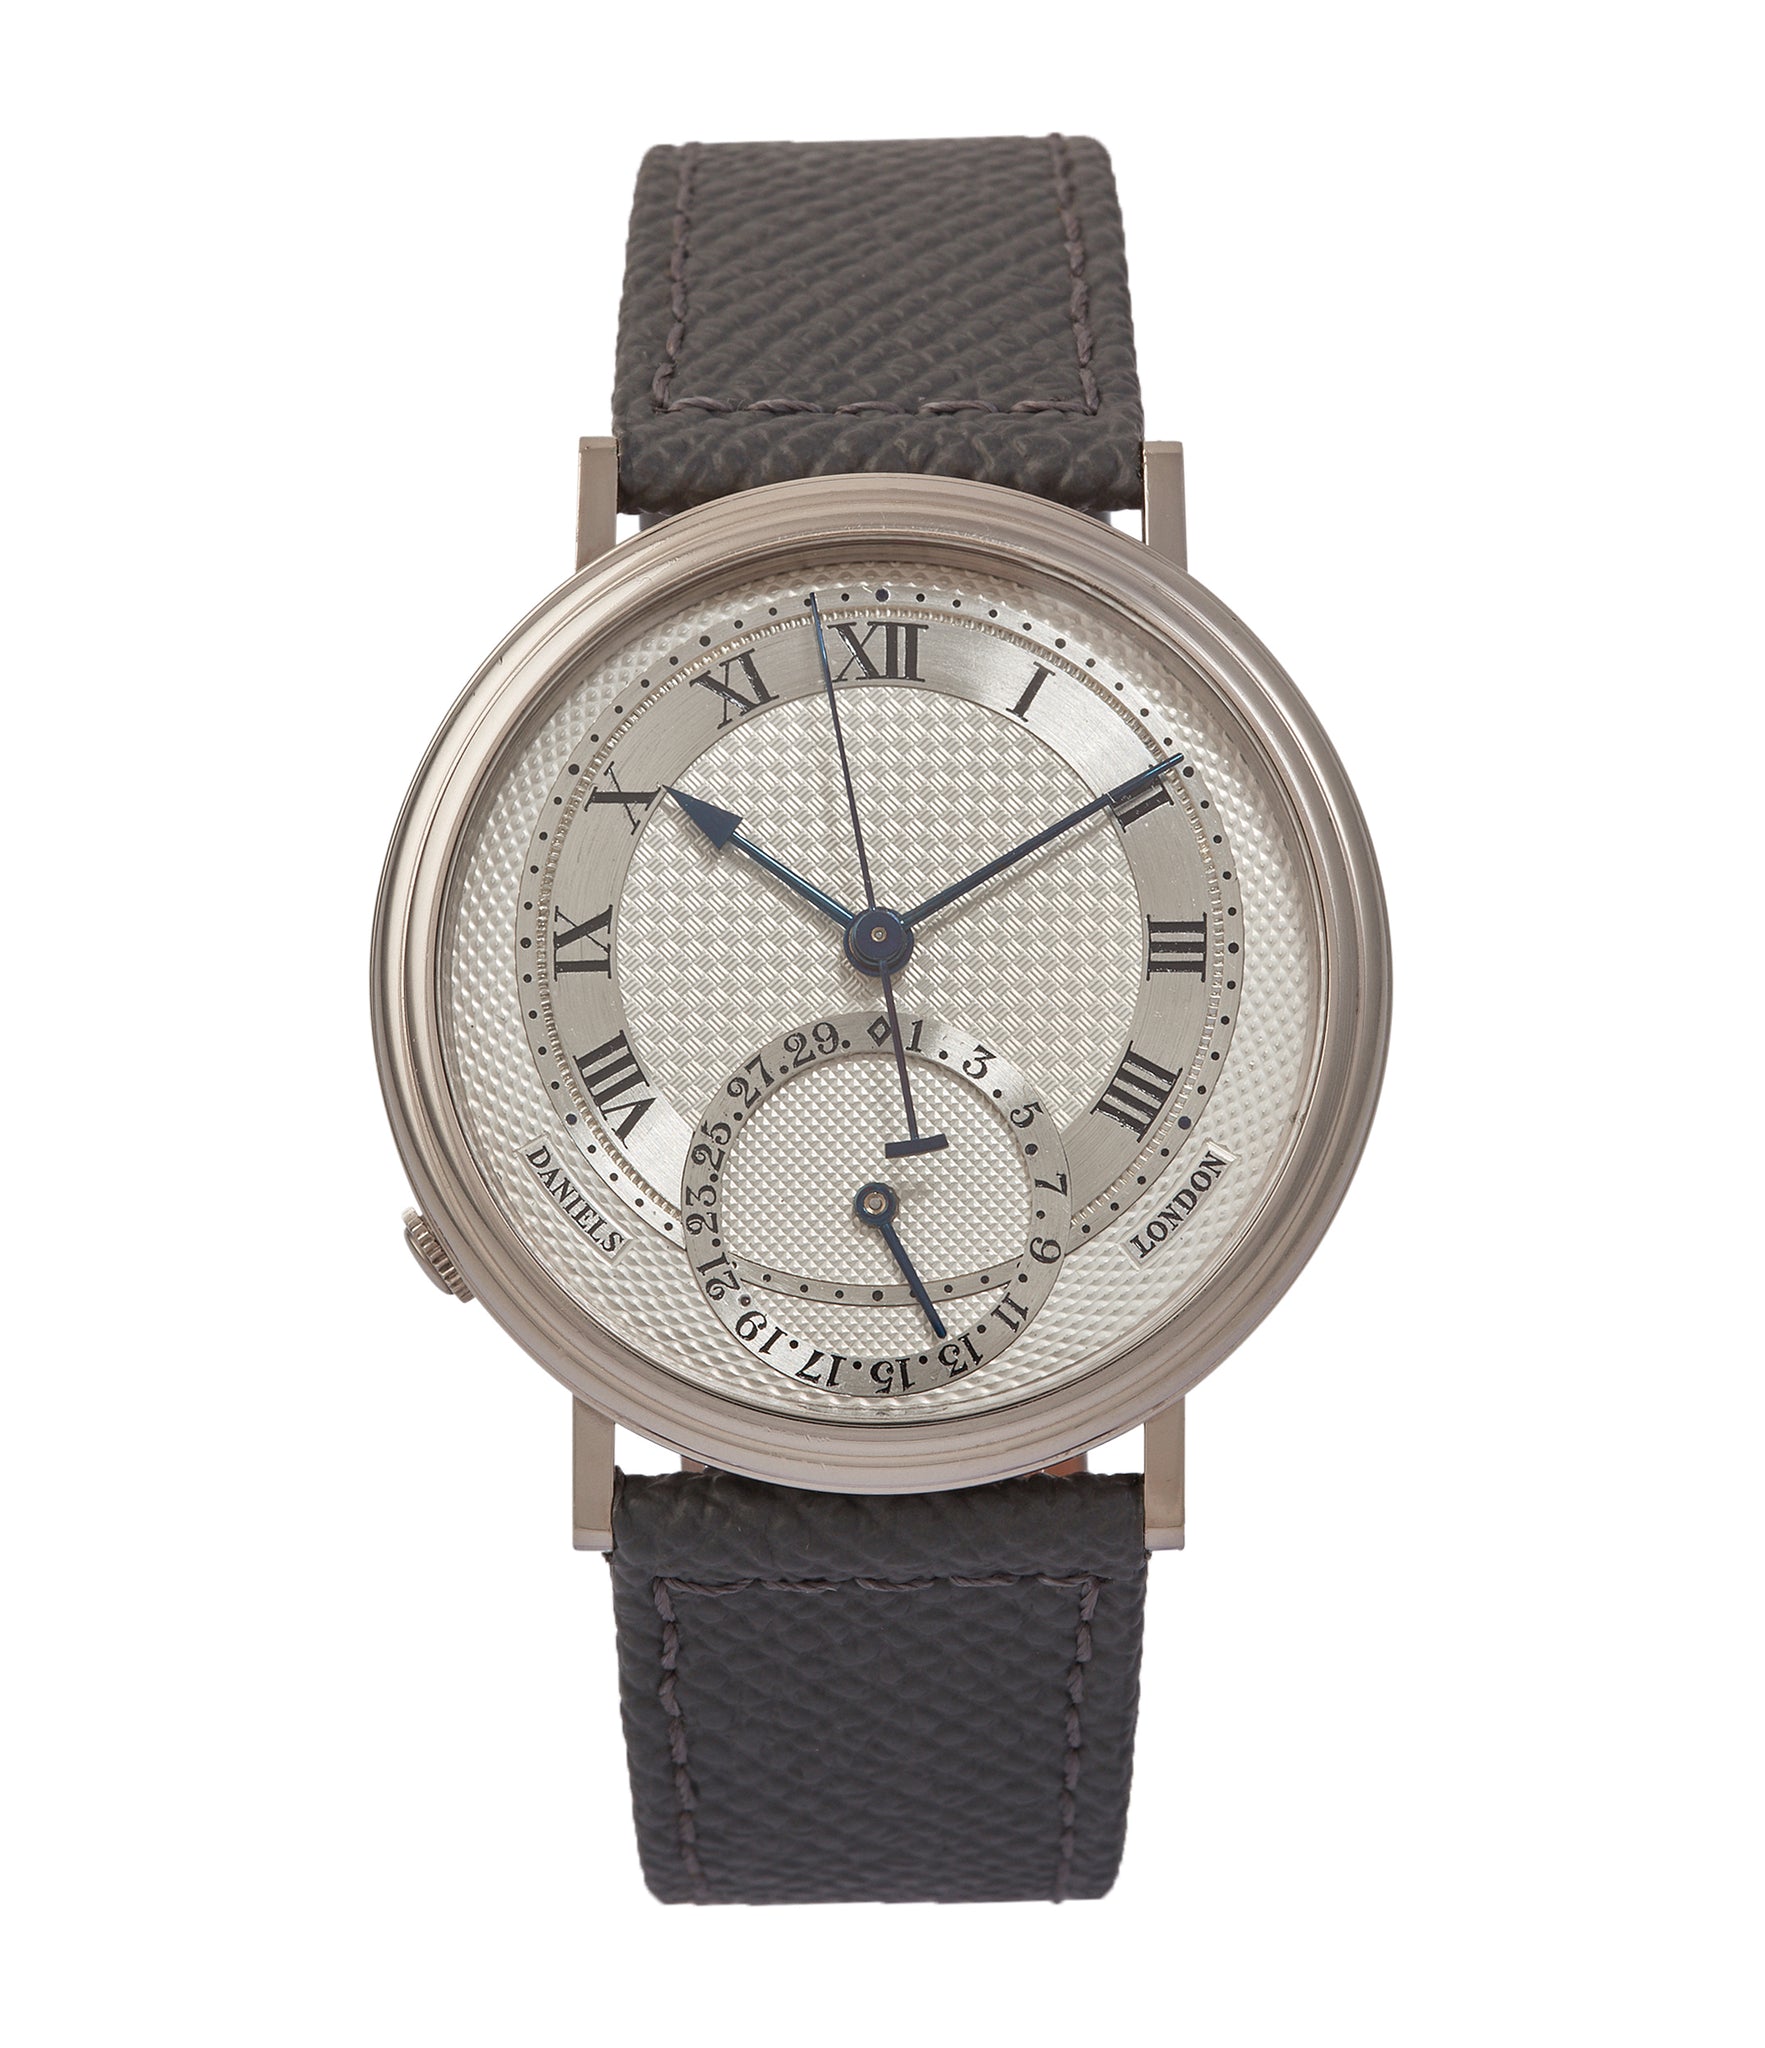 buy George Daniels Millennium wristwatch white gold The Aviator British independent watchmaker Isle of Man for sale online at A Collected Man London specialist of rare watches